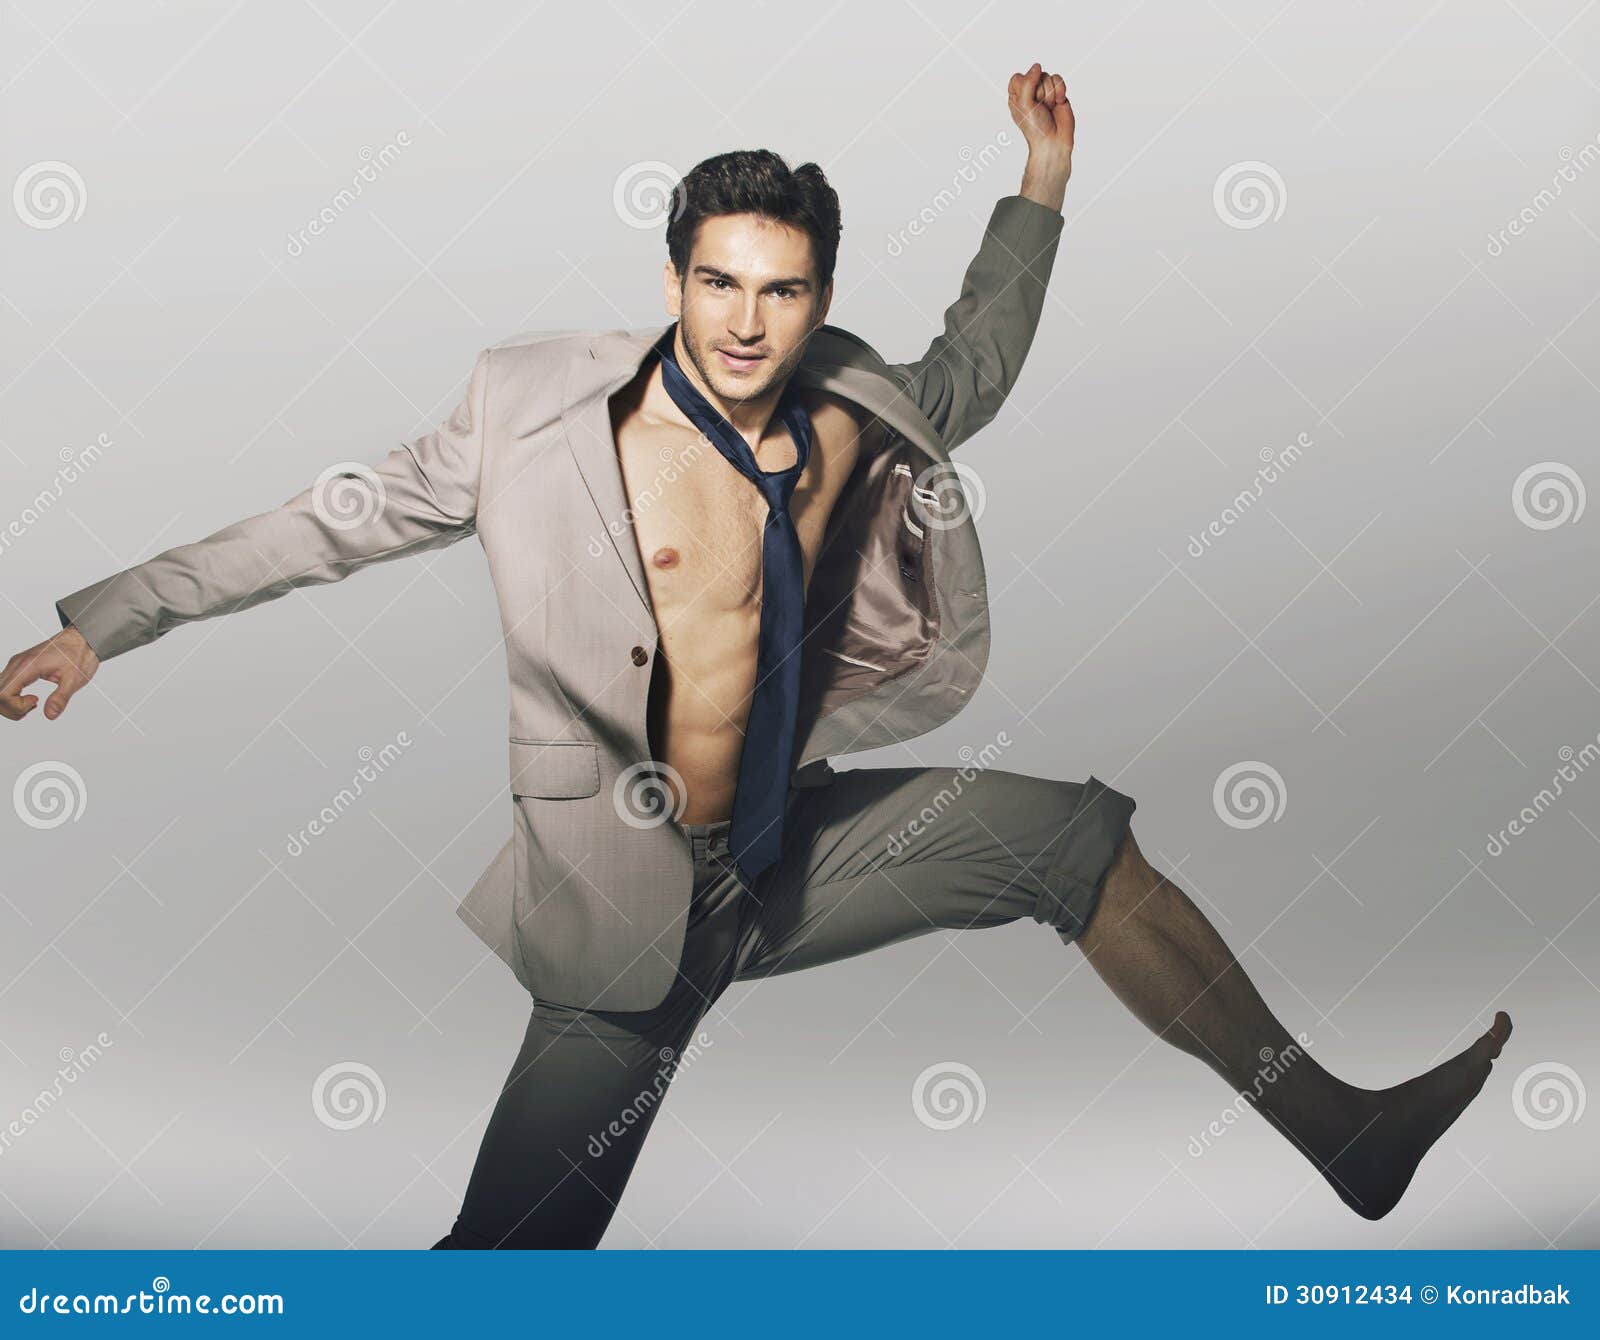 Handsome Jumping Guy with Funny Tie Stock Photo - Image of lifestyle,  elegant: 30912434